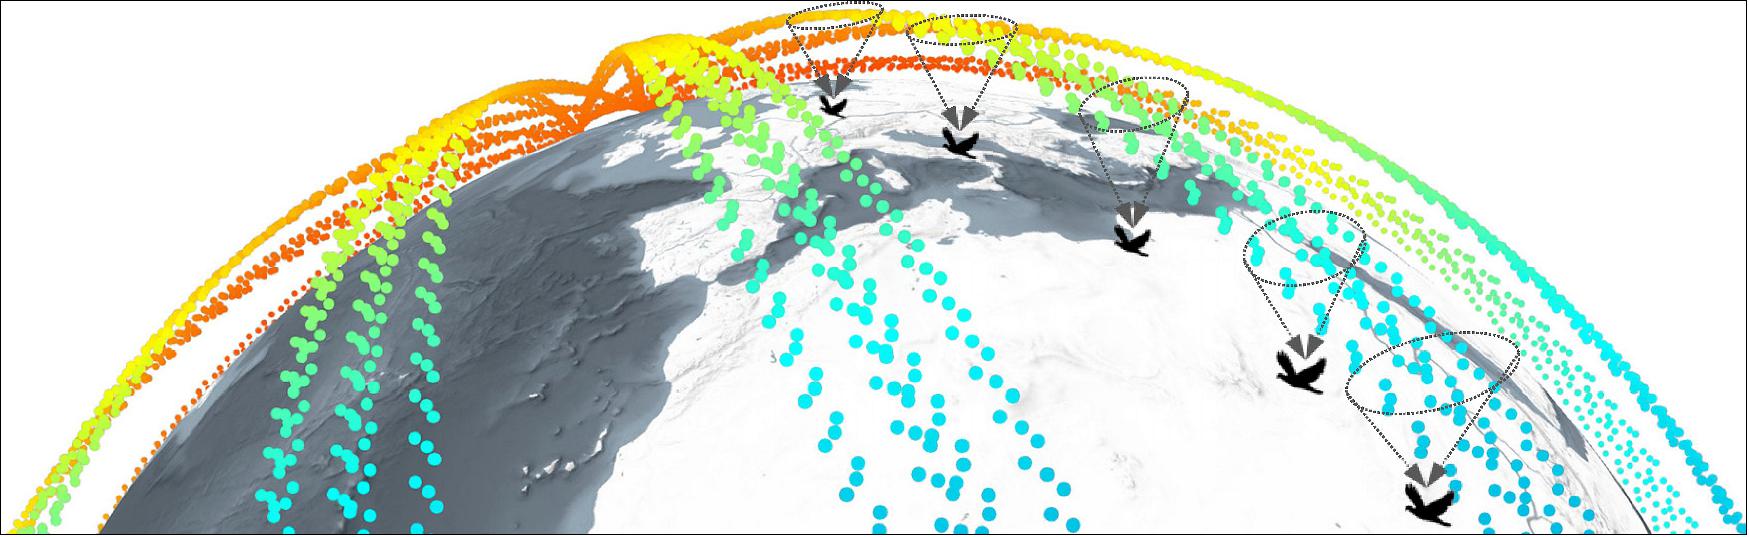 Figure 49: Data from Swarm overpasses with GPS tracking points of migratory animals (image credit: Urška Demšar, University of St Andrews)